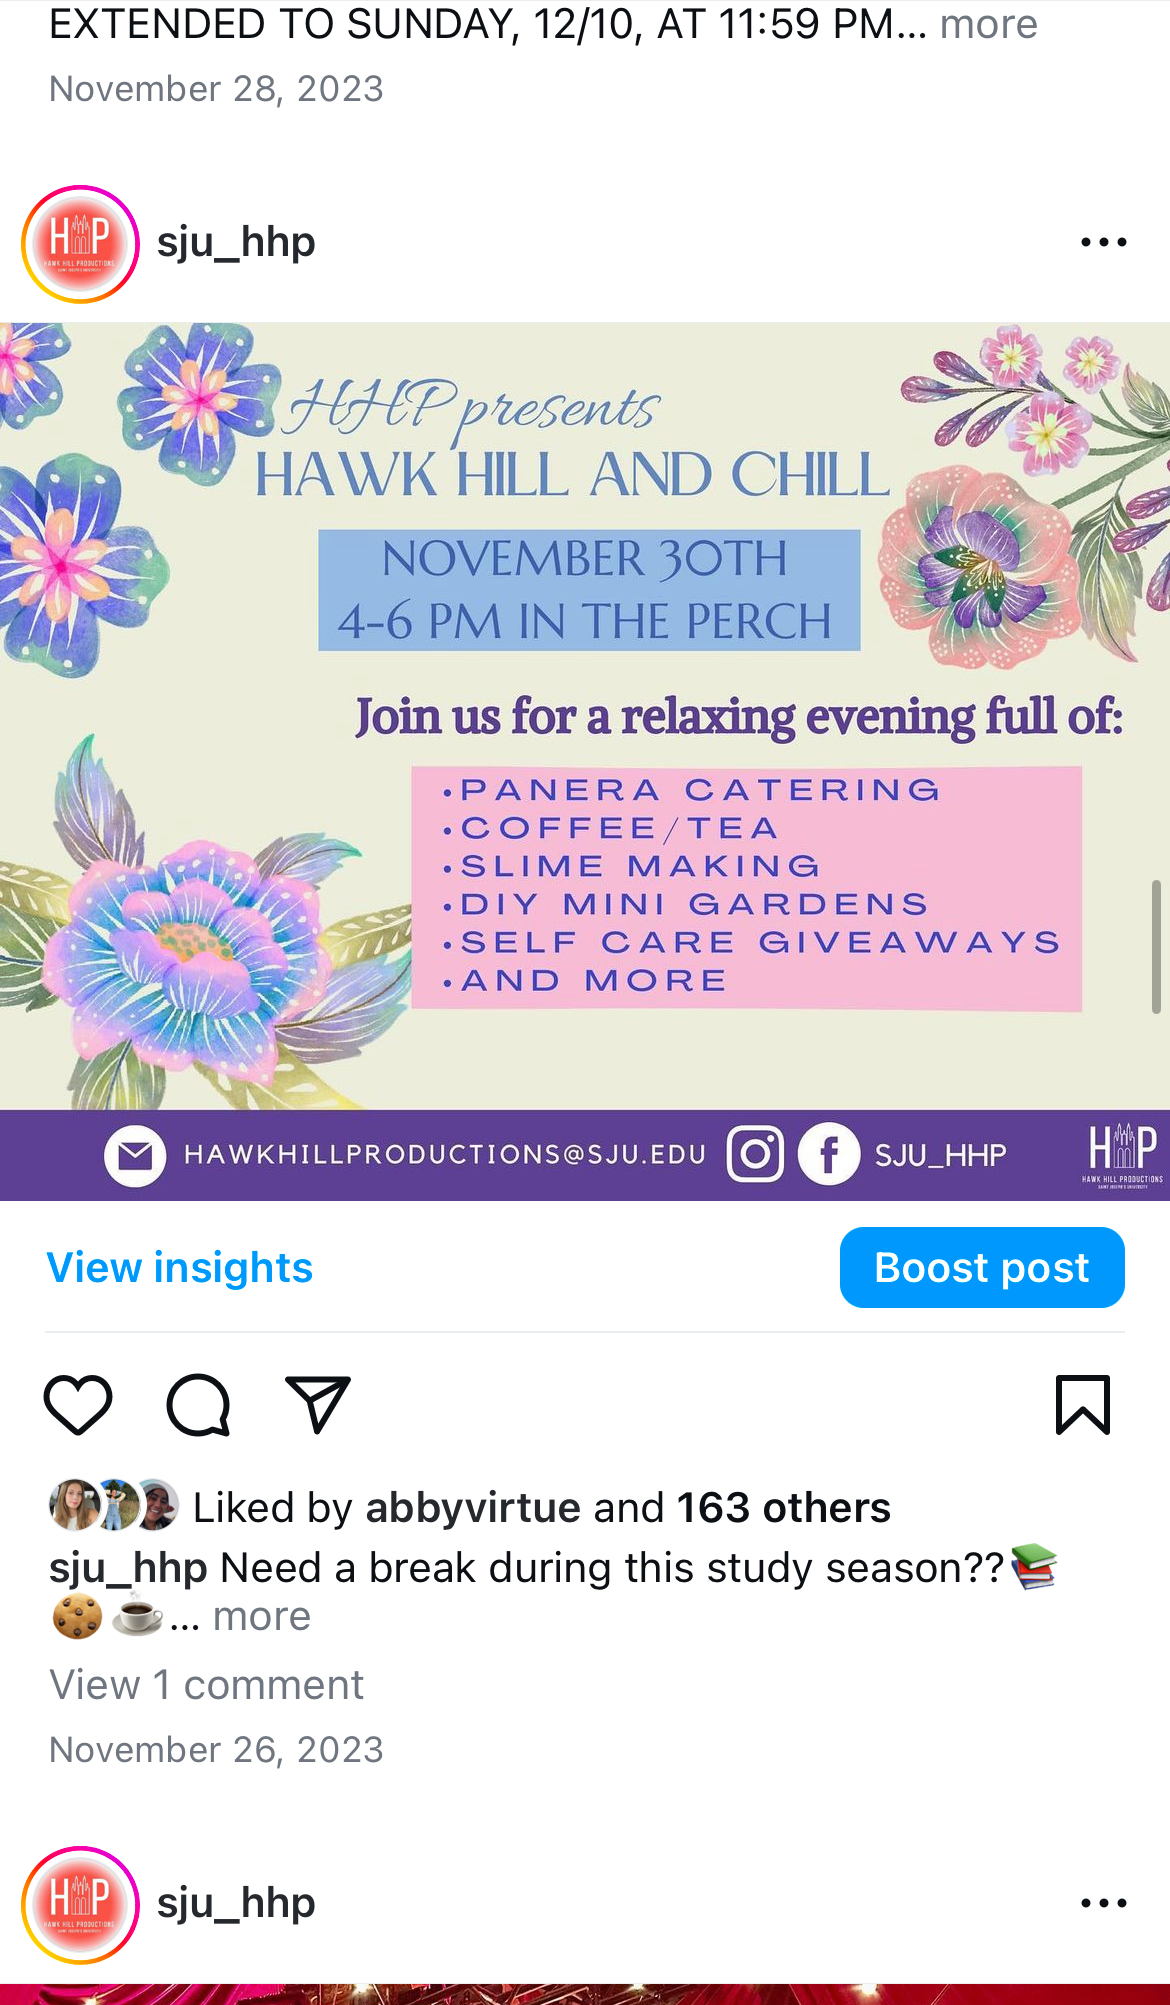 This is a post for a campus event titled Hawk Hill and Chill that will allow students to eat comfort food, do crafts, and get free self care items. There is a light green background with flowers all around the edge of the screen and a very calm blue font for the event title.